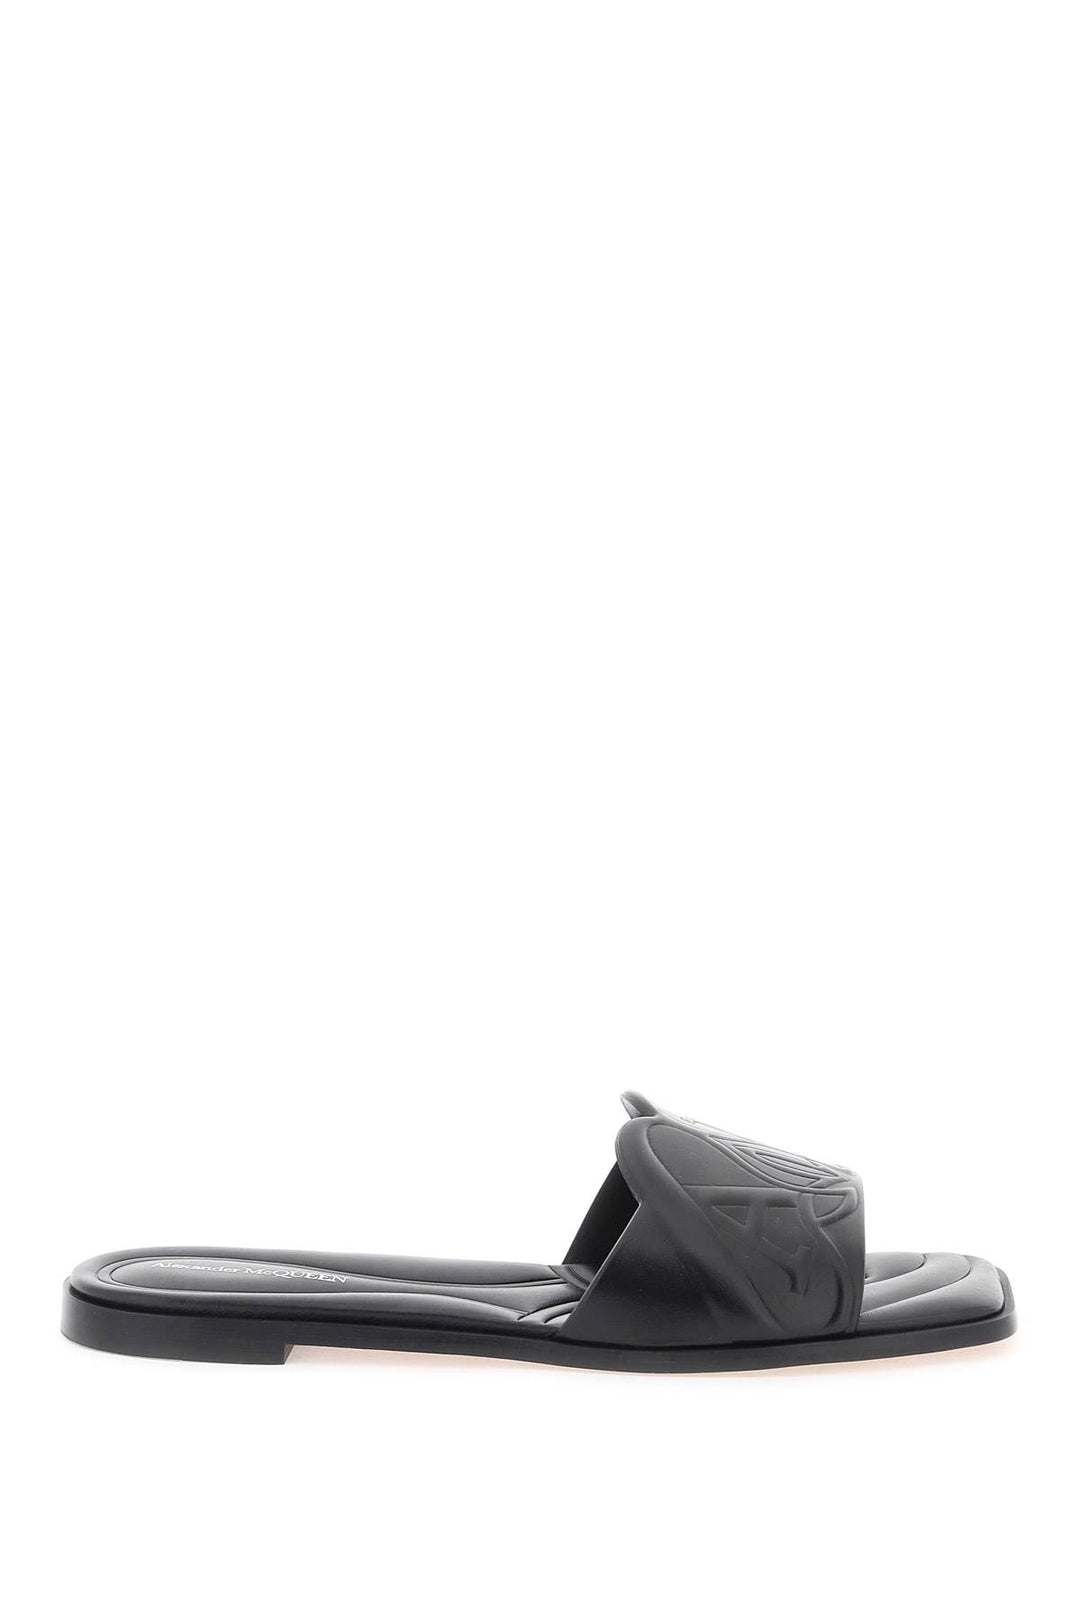 Alexander mcqueen leather slides with embossed seal logo-0